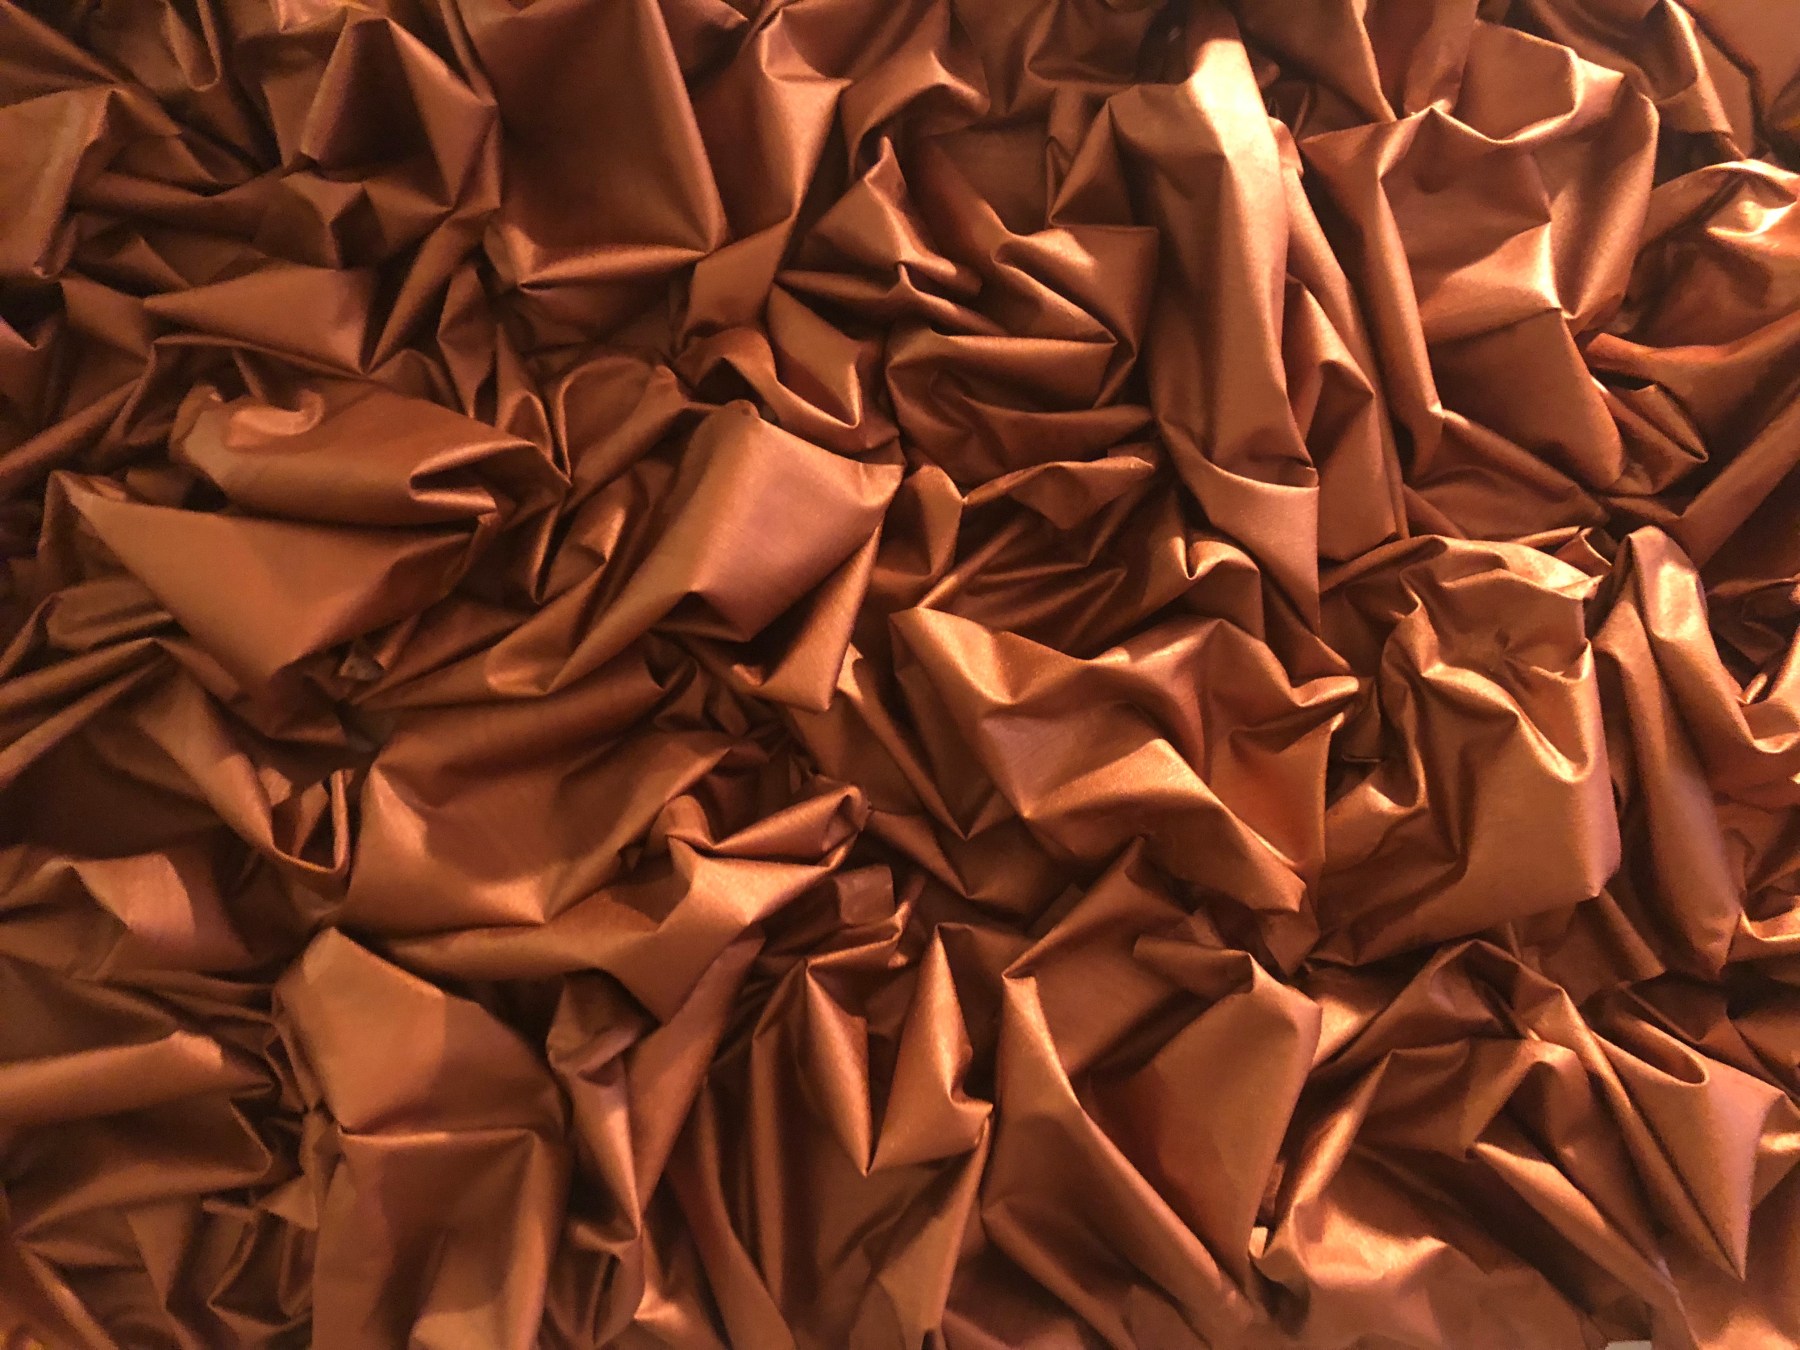 Folded Copper from Unfolded by Michel Abboud